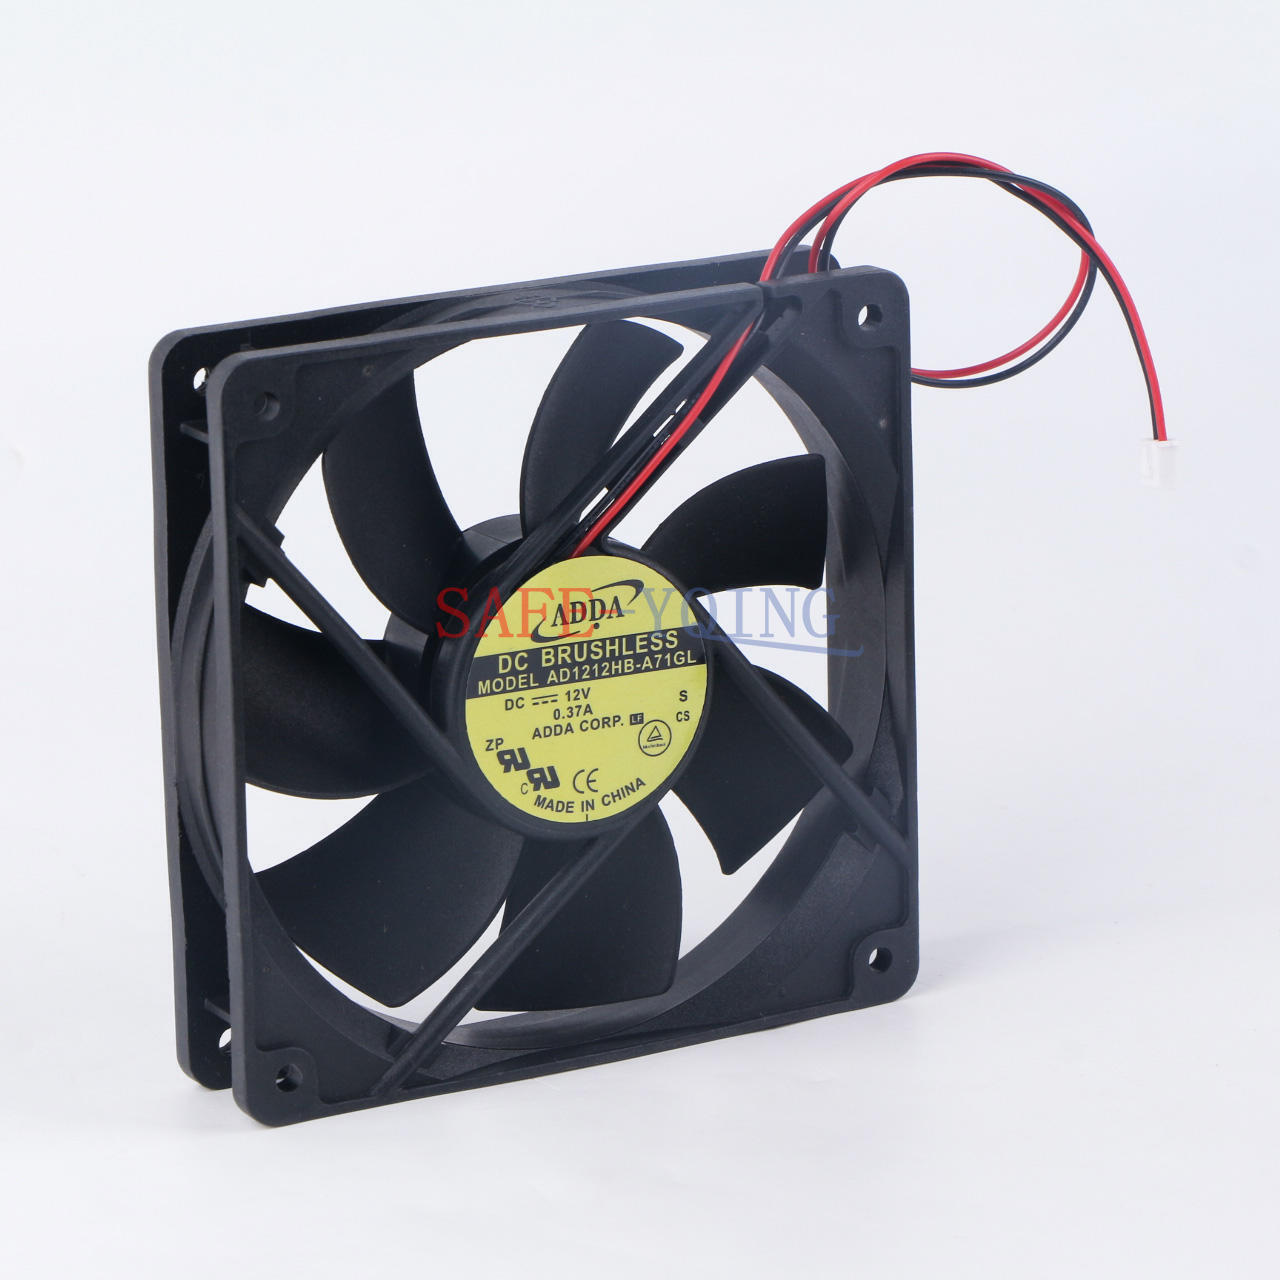 For ADDA AD1212HB-A71GL FAN DC BRUSHLESS Model 12V 0.37A 2 PIN POWER